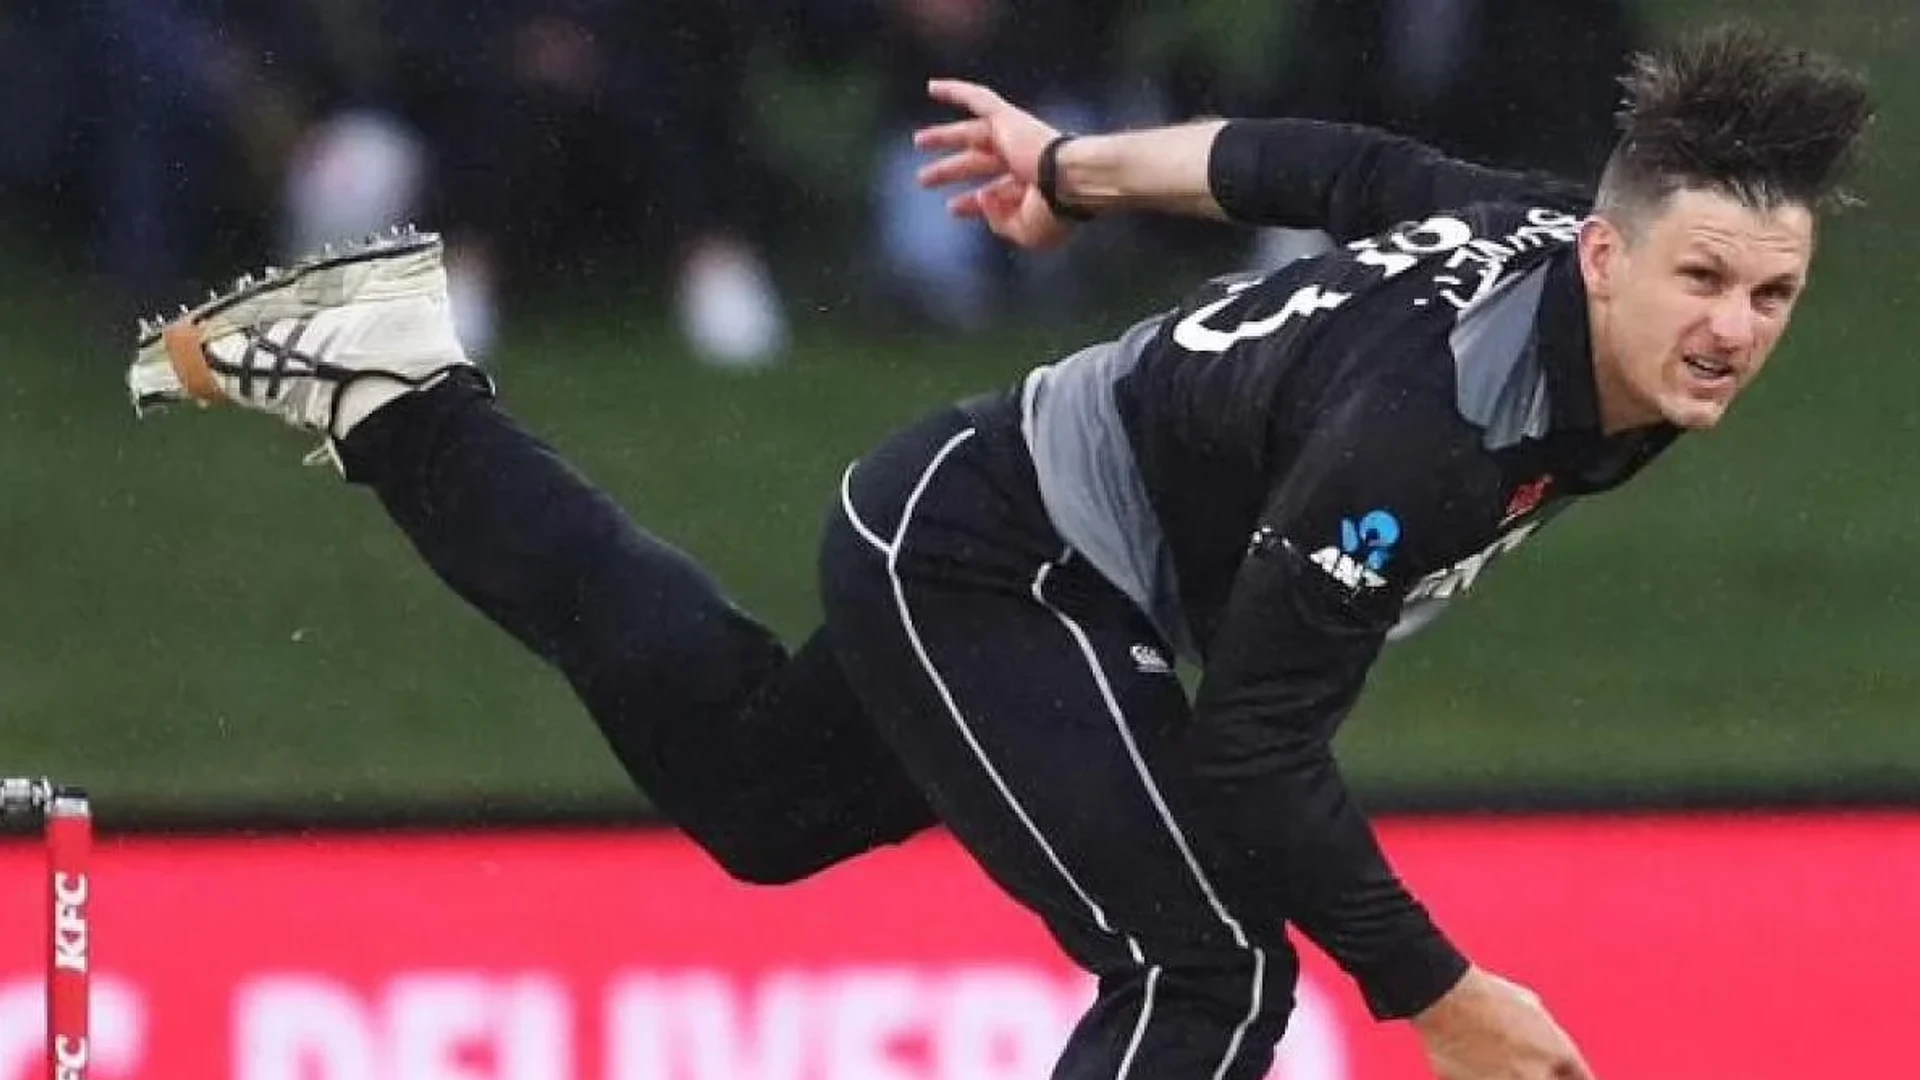 NZ Bowler Hamish Bennett Announces Retirement From All Forms Of Cricket